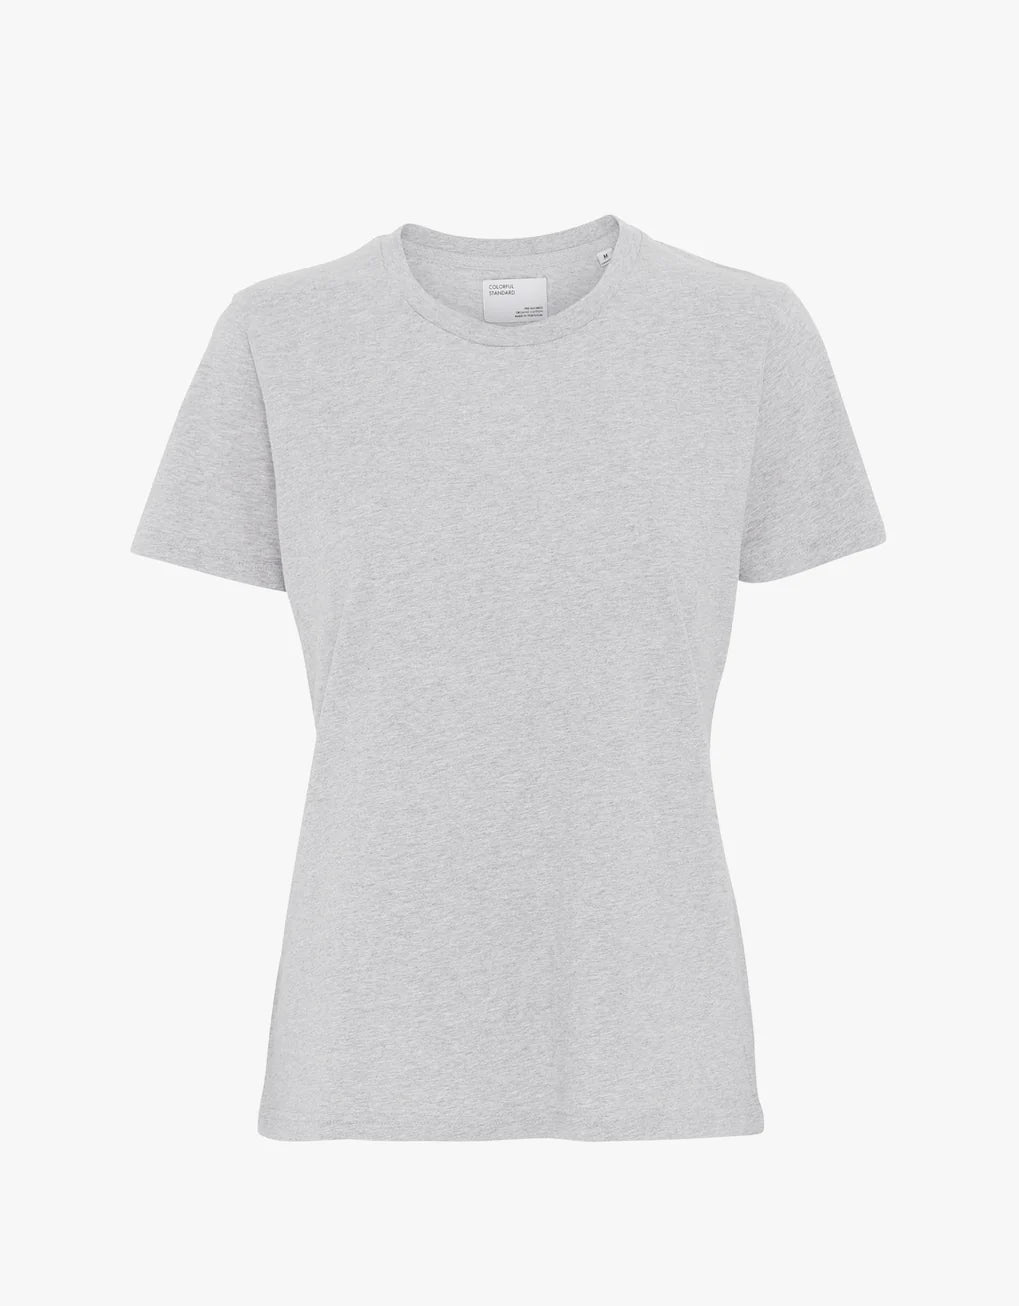 A machine washable Light Organic Tee made of organic cotton on a white background by Colorful Standard.